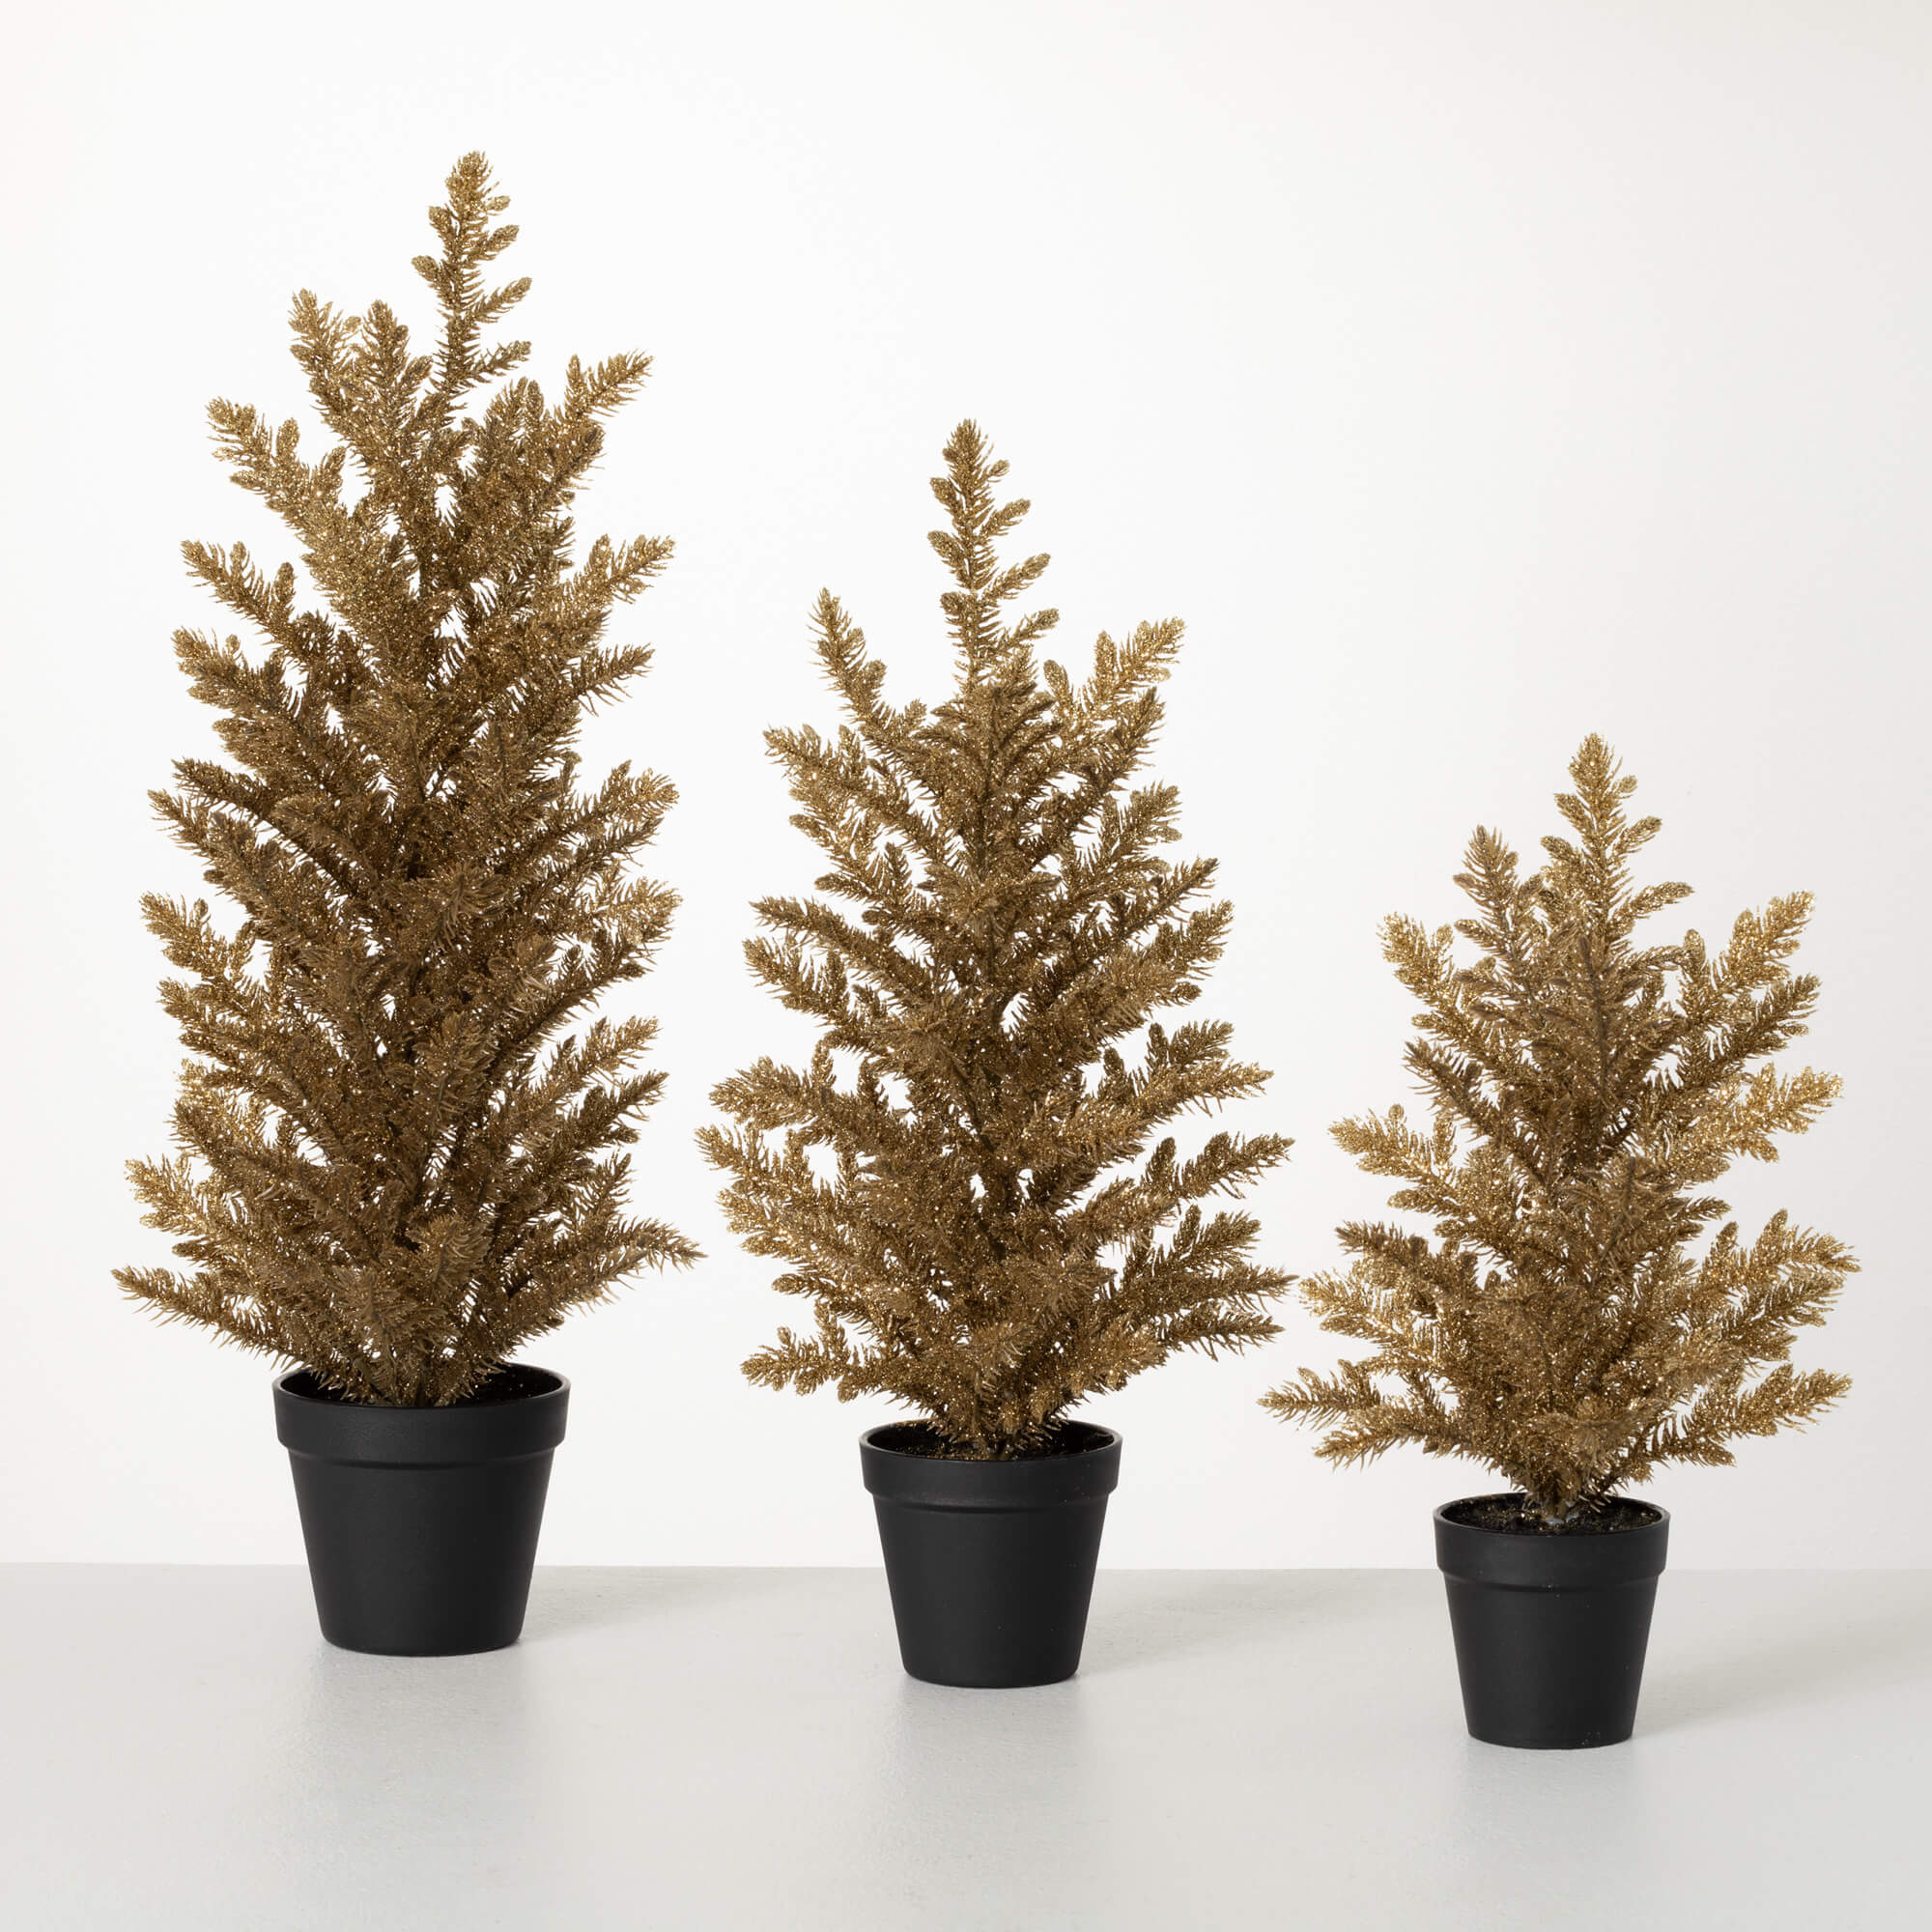 POTTED GOLD PINE TREE SET OF 3